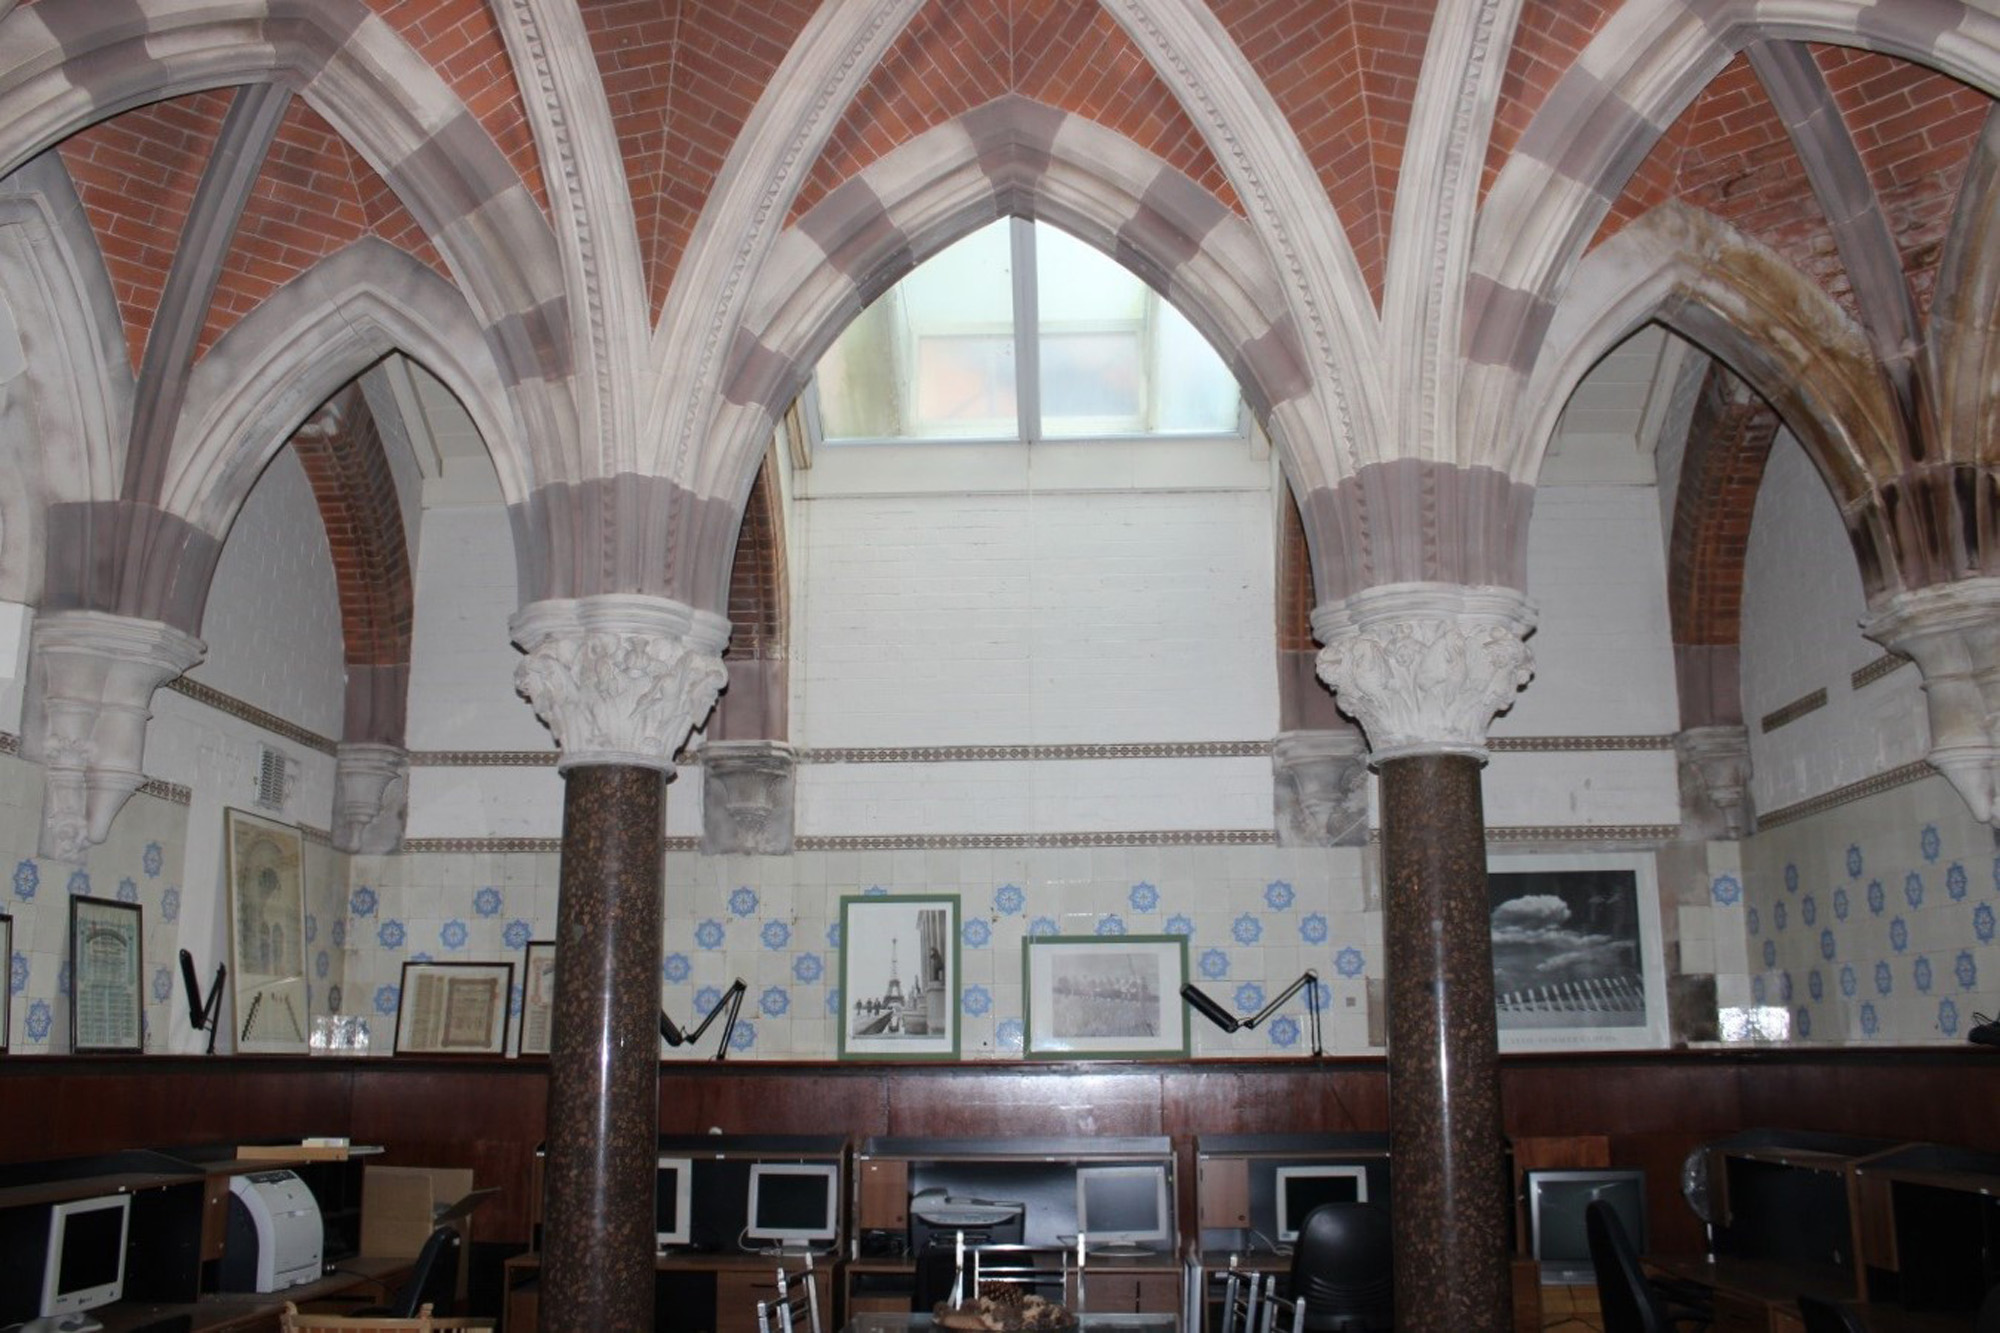 The polychromatic brick arches of the cooling rooms - 